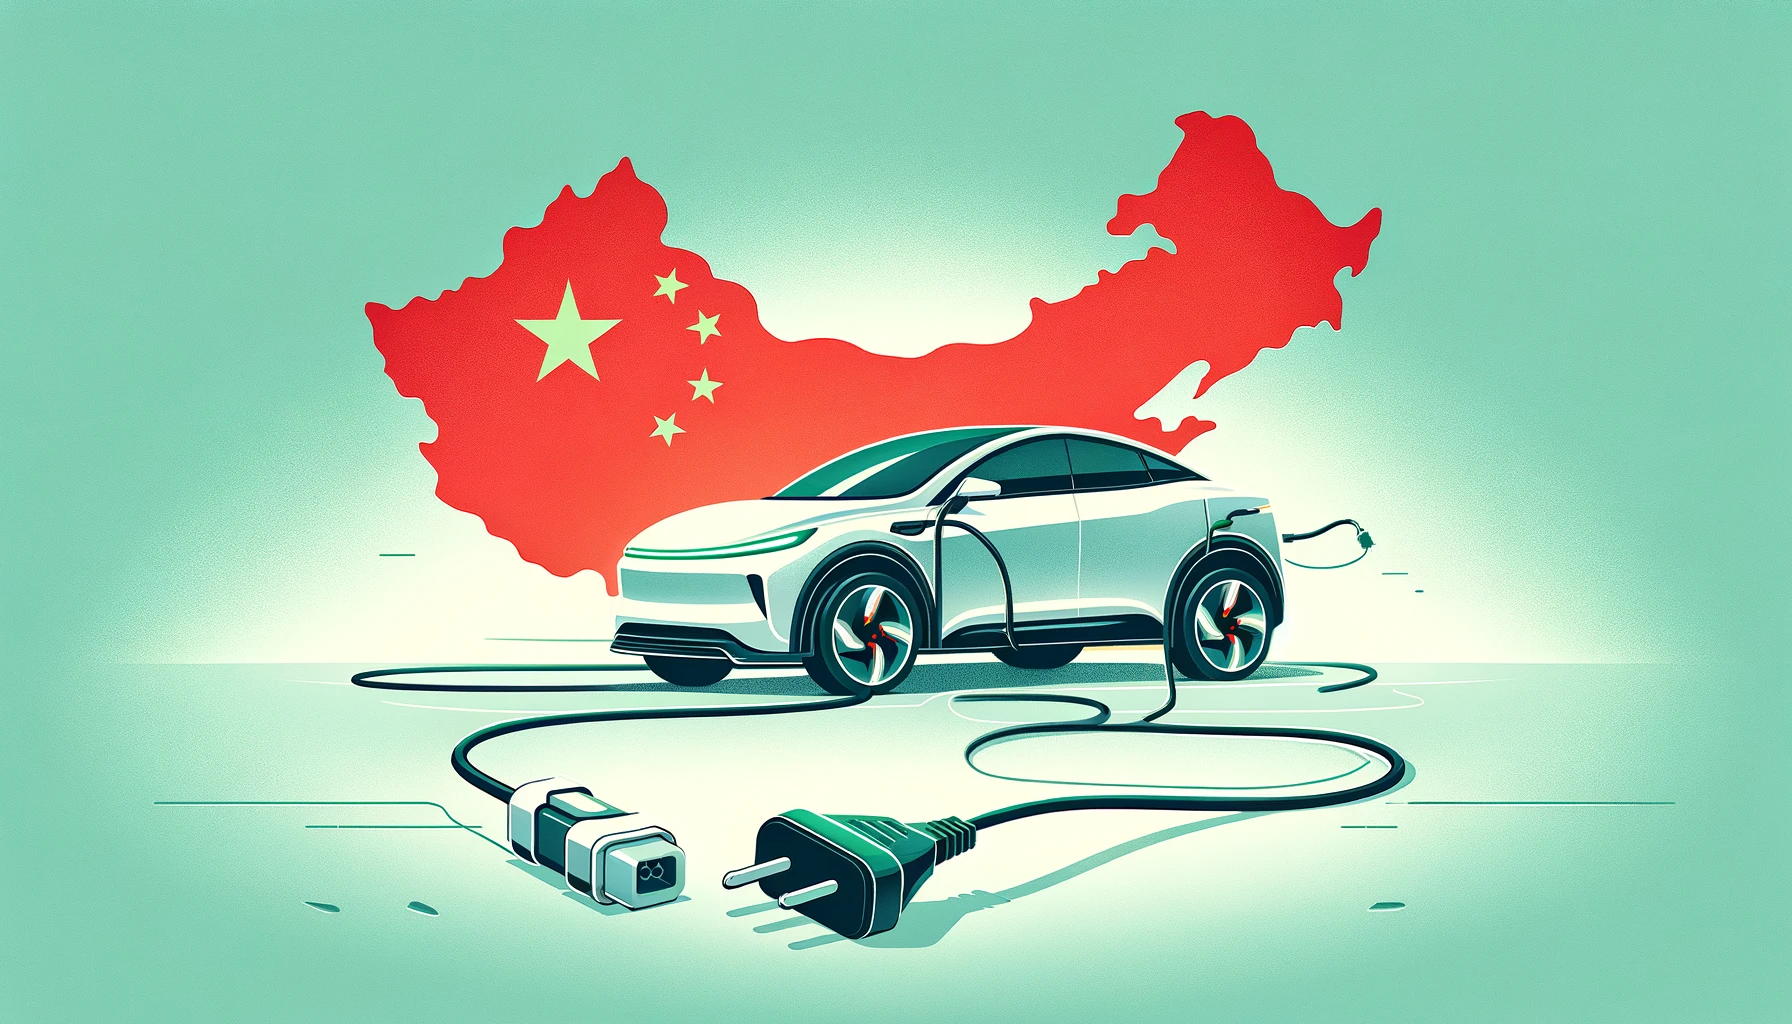 China commits to enhancing support for electric vehicles in the face of trade challenges